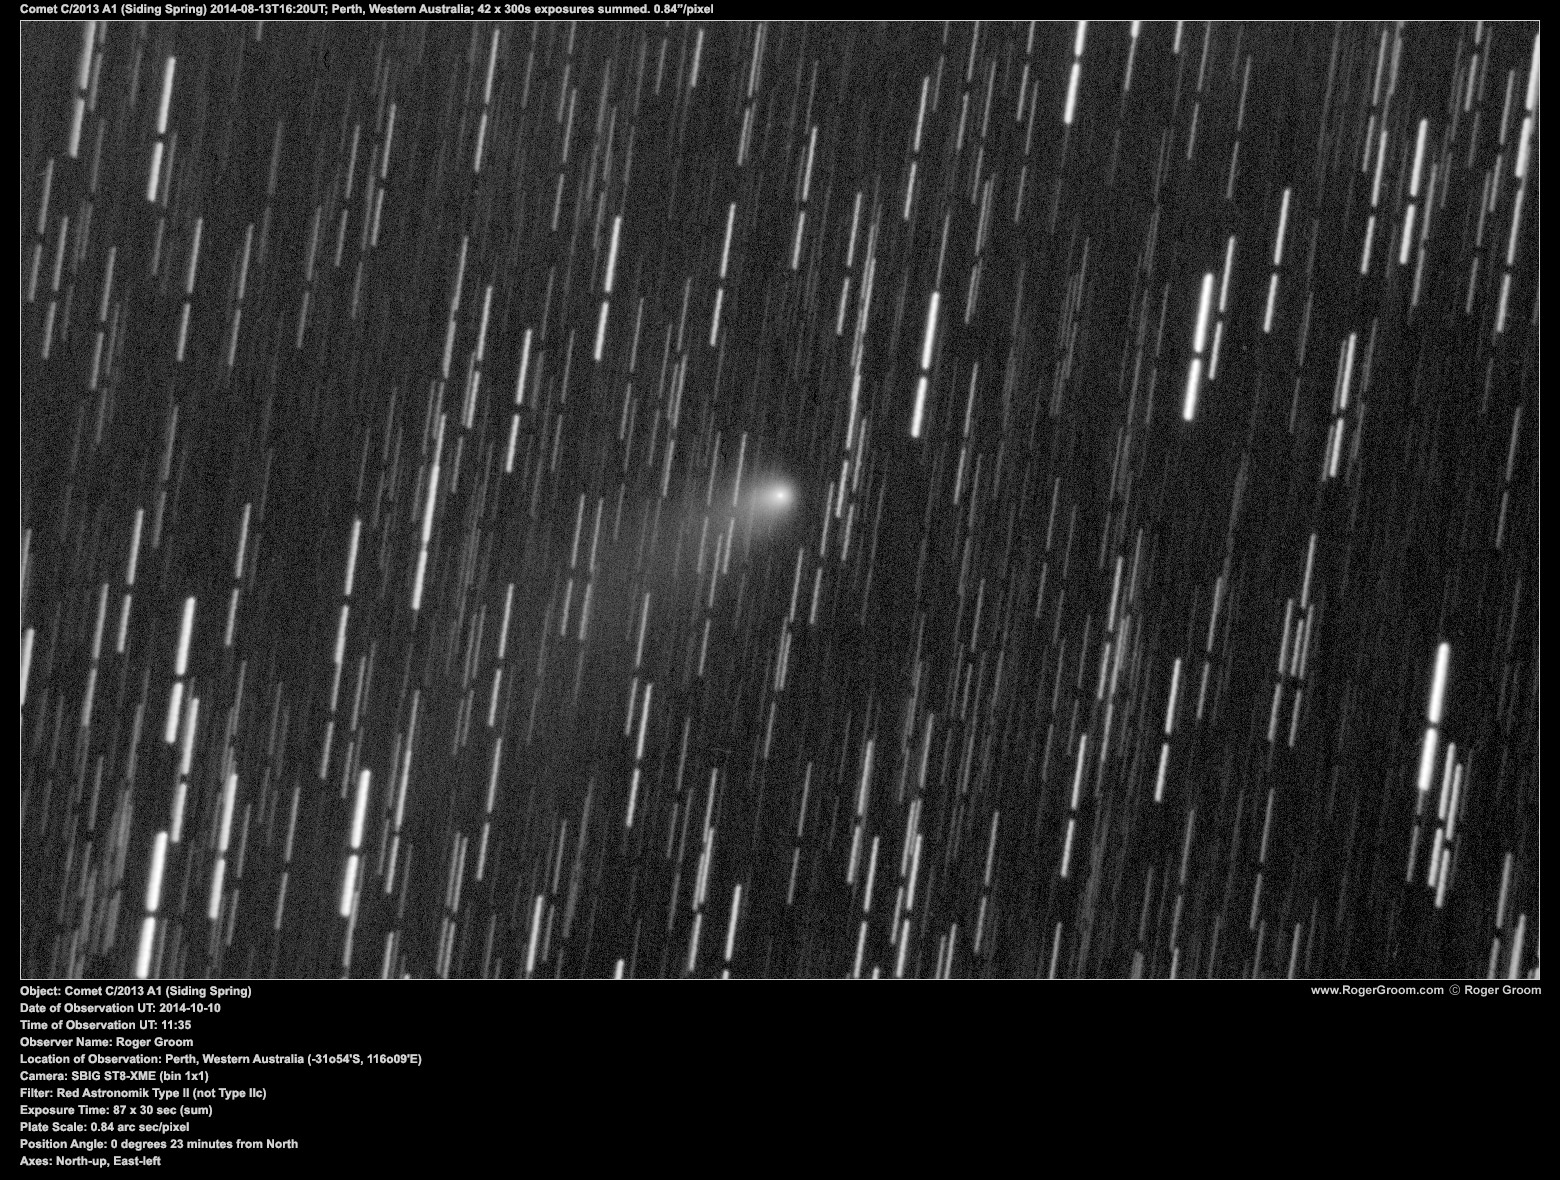 Object: Comet C/2013 A1 (Siding Spring) Date of Observation UT: 2014-10-10 Time of Observation UT: 11:35 Observer Name: Roger Groom Location of Observation: Perth, Western Australia (-31o54'S, 116o09'E) Camera: SBIG ST8-XME (bin 1x1) Filter: Red Astronomik Type II (not Type IIc) Exposure Time: 87 x 30 sec (sum) Plate Scale: 0.84 arc sec/pixel Position Angle: 0 degrees 23 minutes from North Axes: North-up, East-left